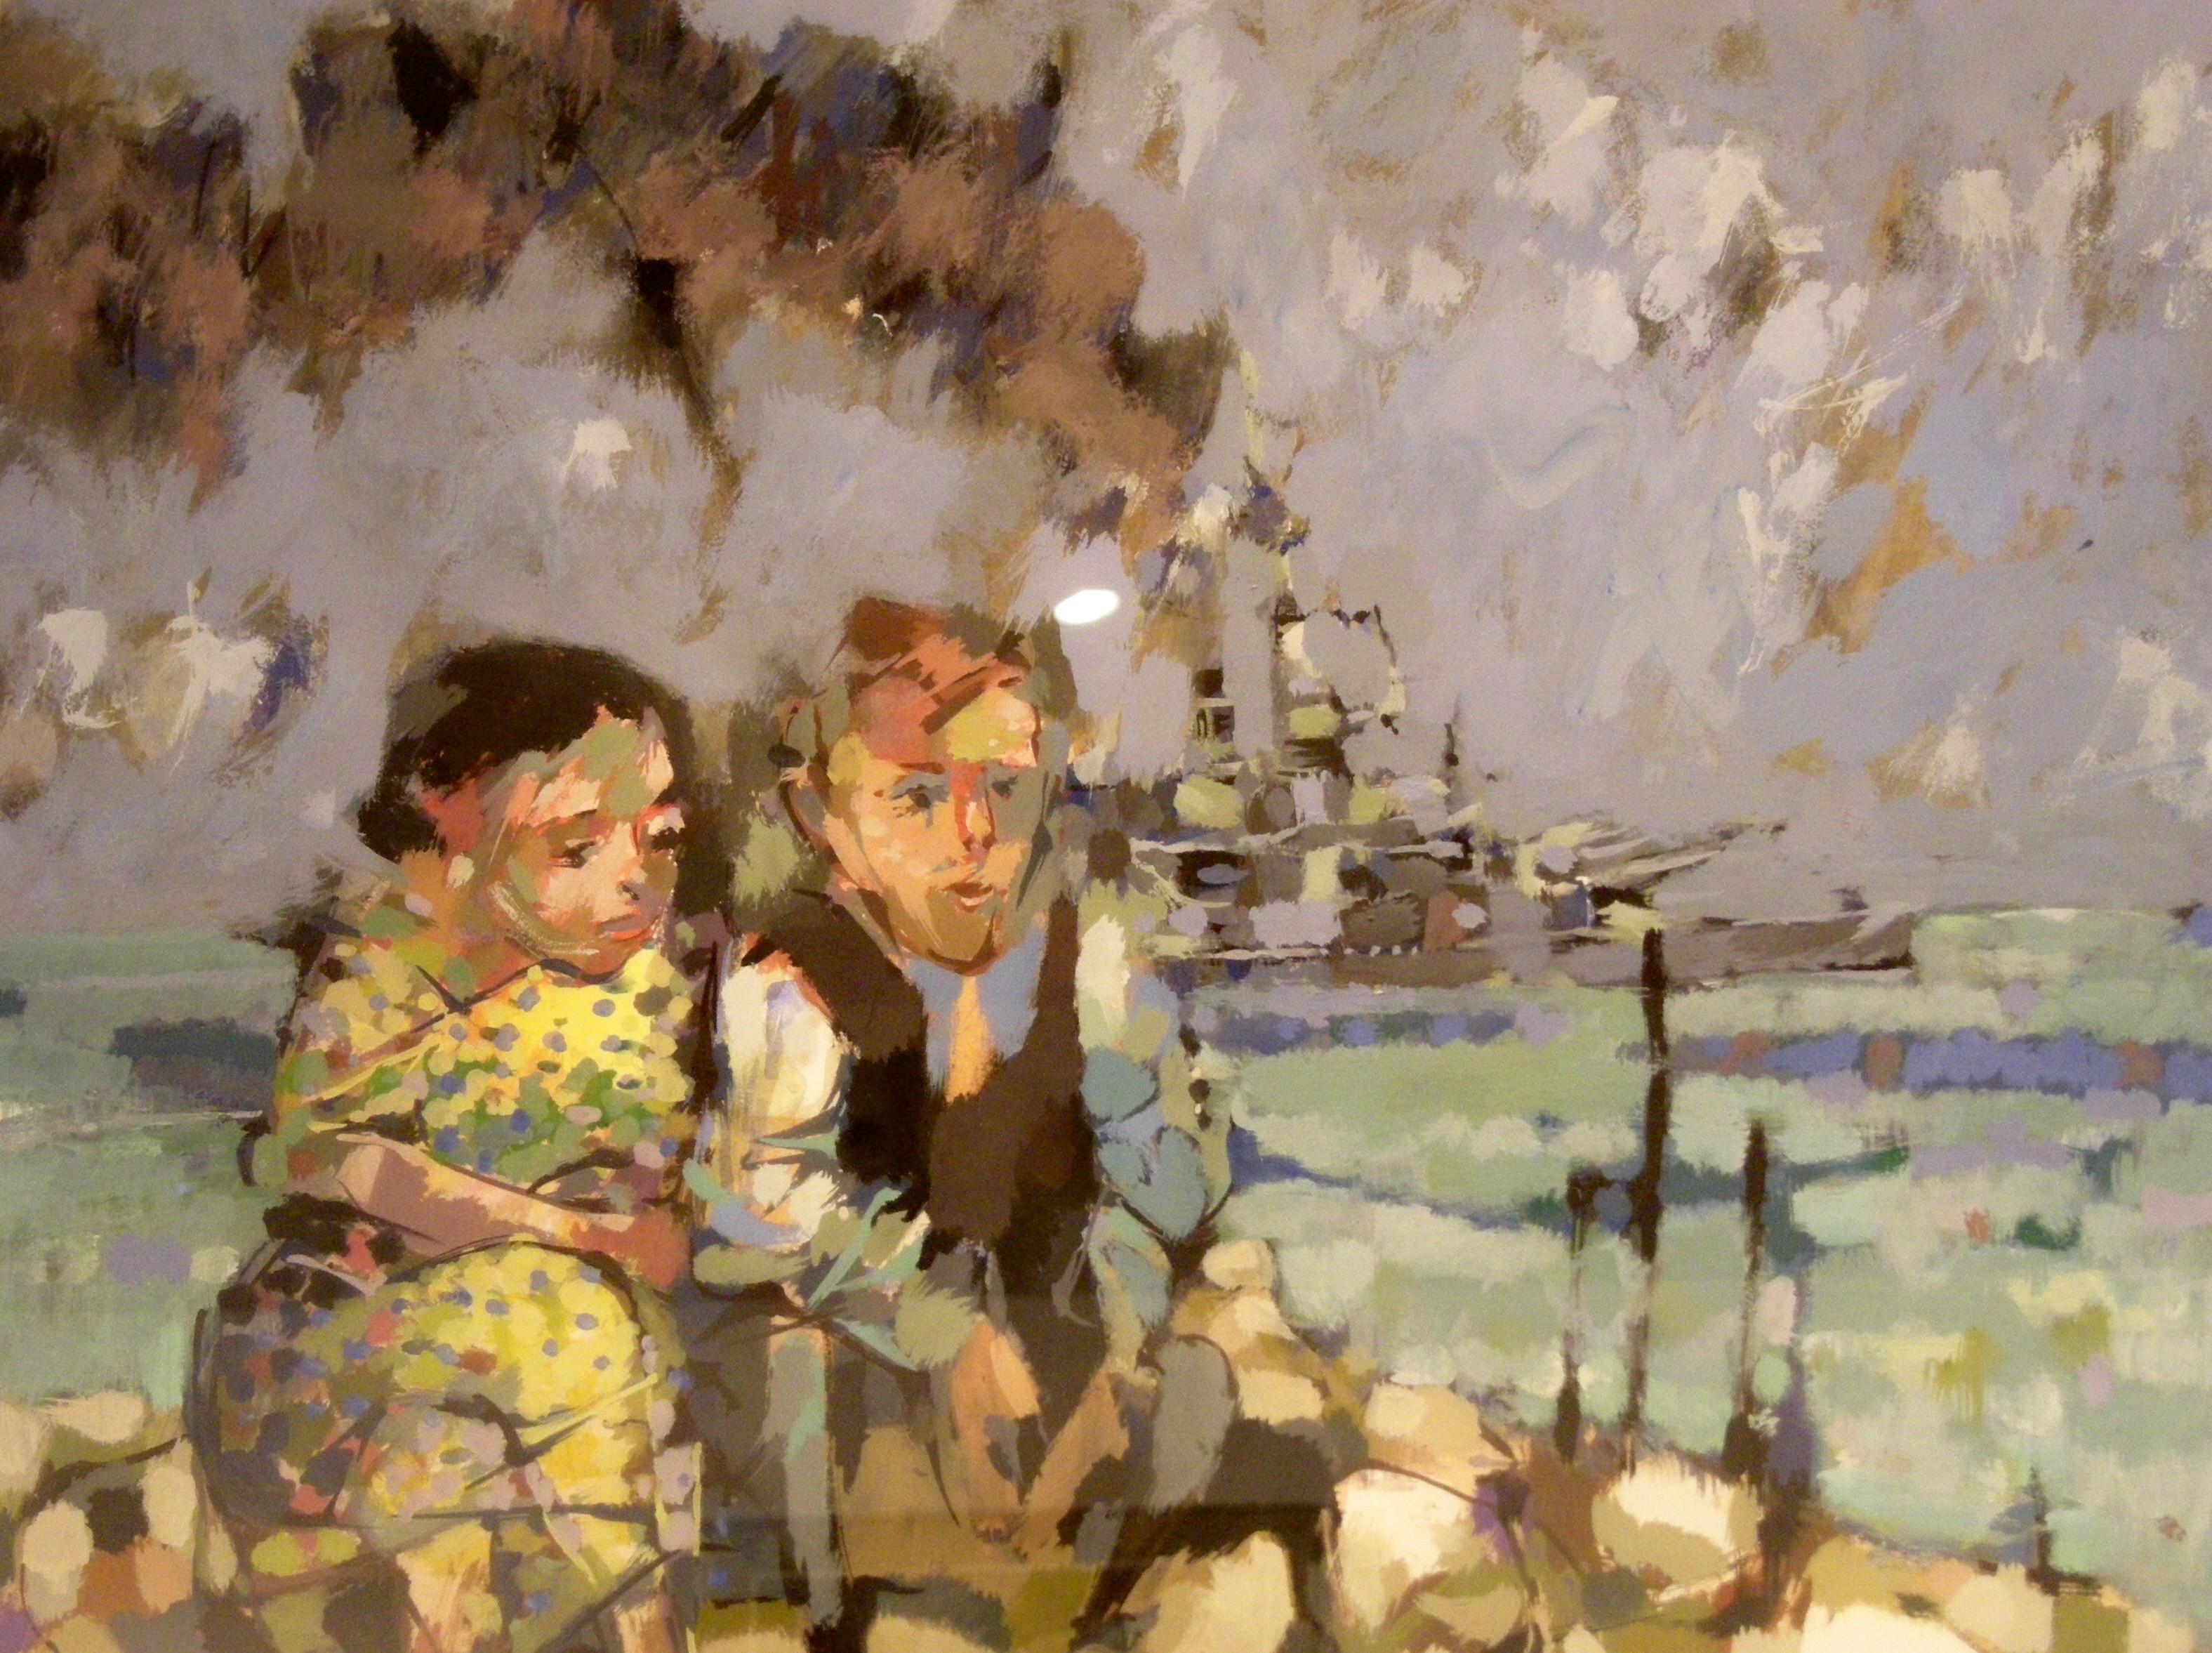 Luis Eades Figurative Painting – "Children and War" Impressionist Figurative Abstract Painting